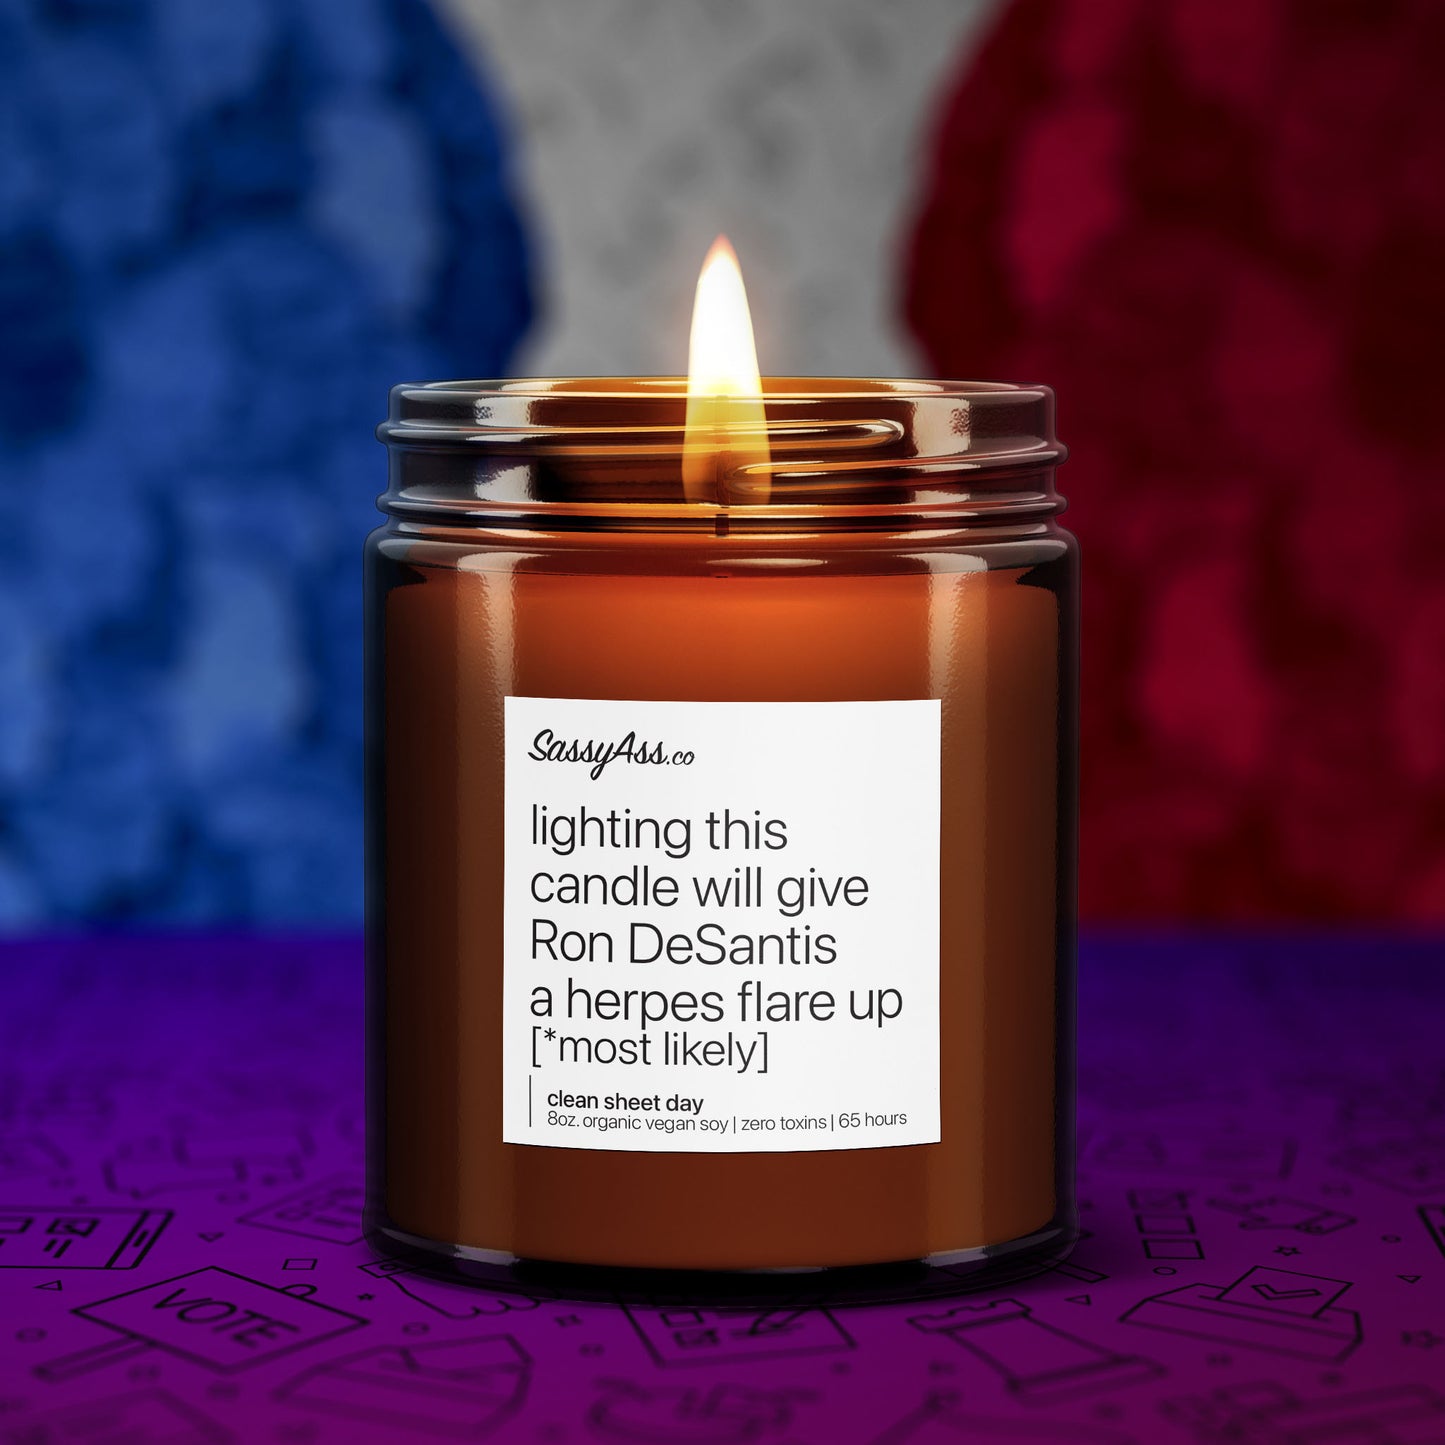 Lighting This Candle Will Give Ron DeSantis a Herpes Flare Up - Scented Soy Candle: Make A Statement and Support LGBTQ+ Rights